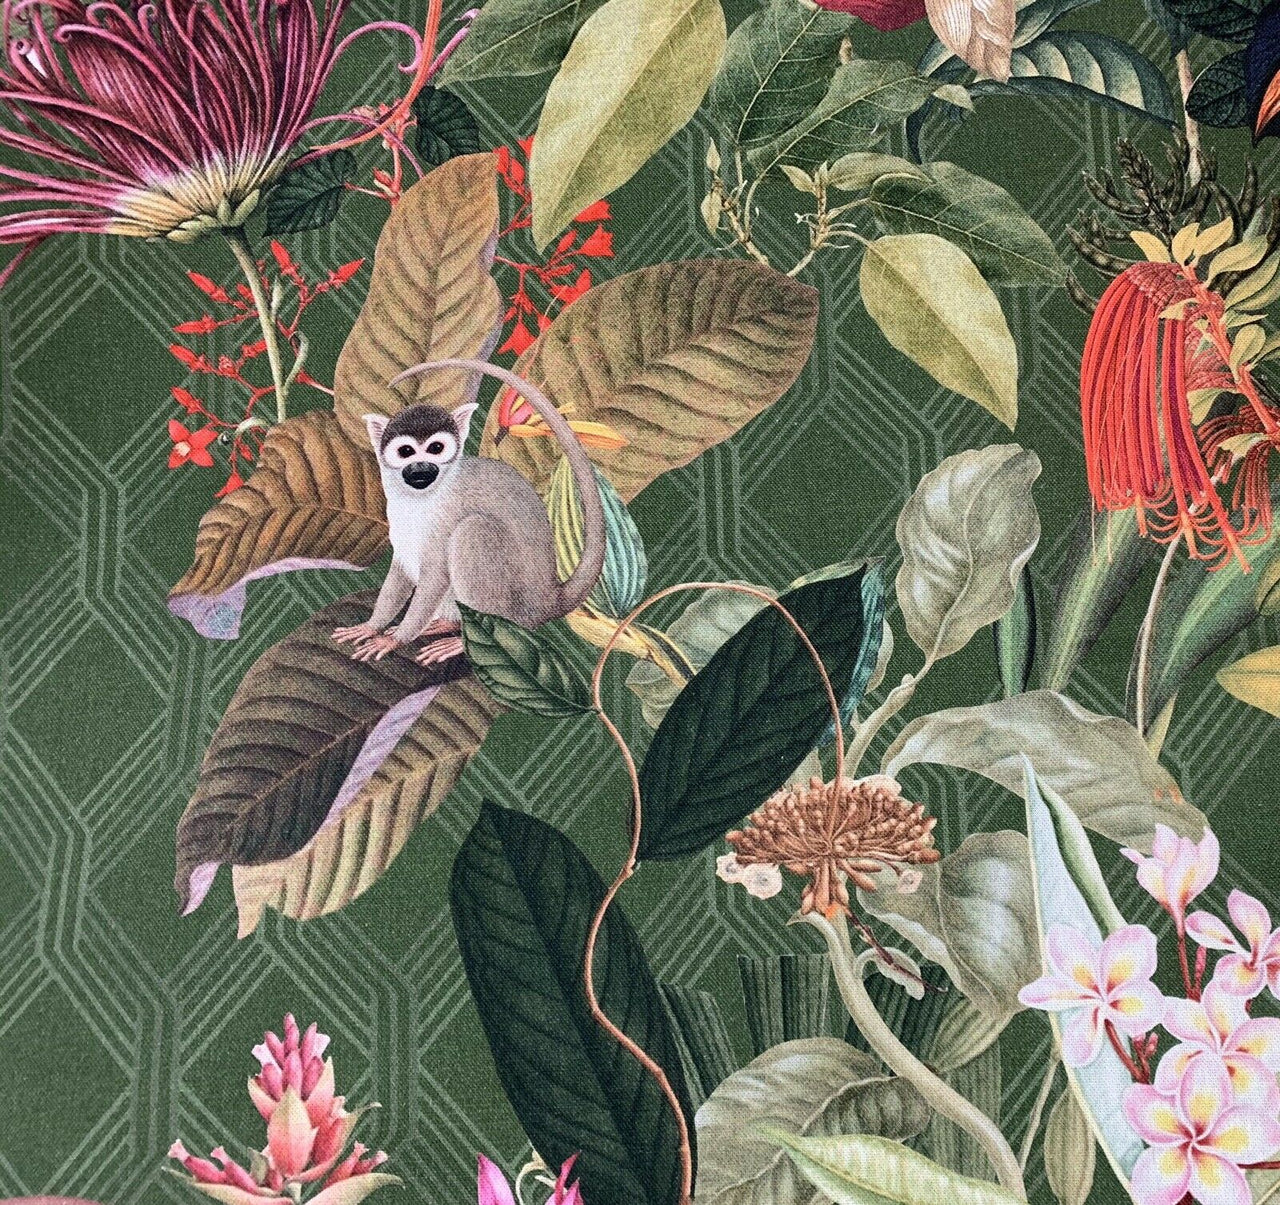 Monkey Toucan Colibri Green Botanical fabric by yard/meter Tropical Sewing Material Red Flowers Textiles Green Forest Botanical Printed Cotton